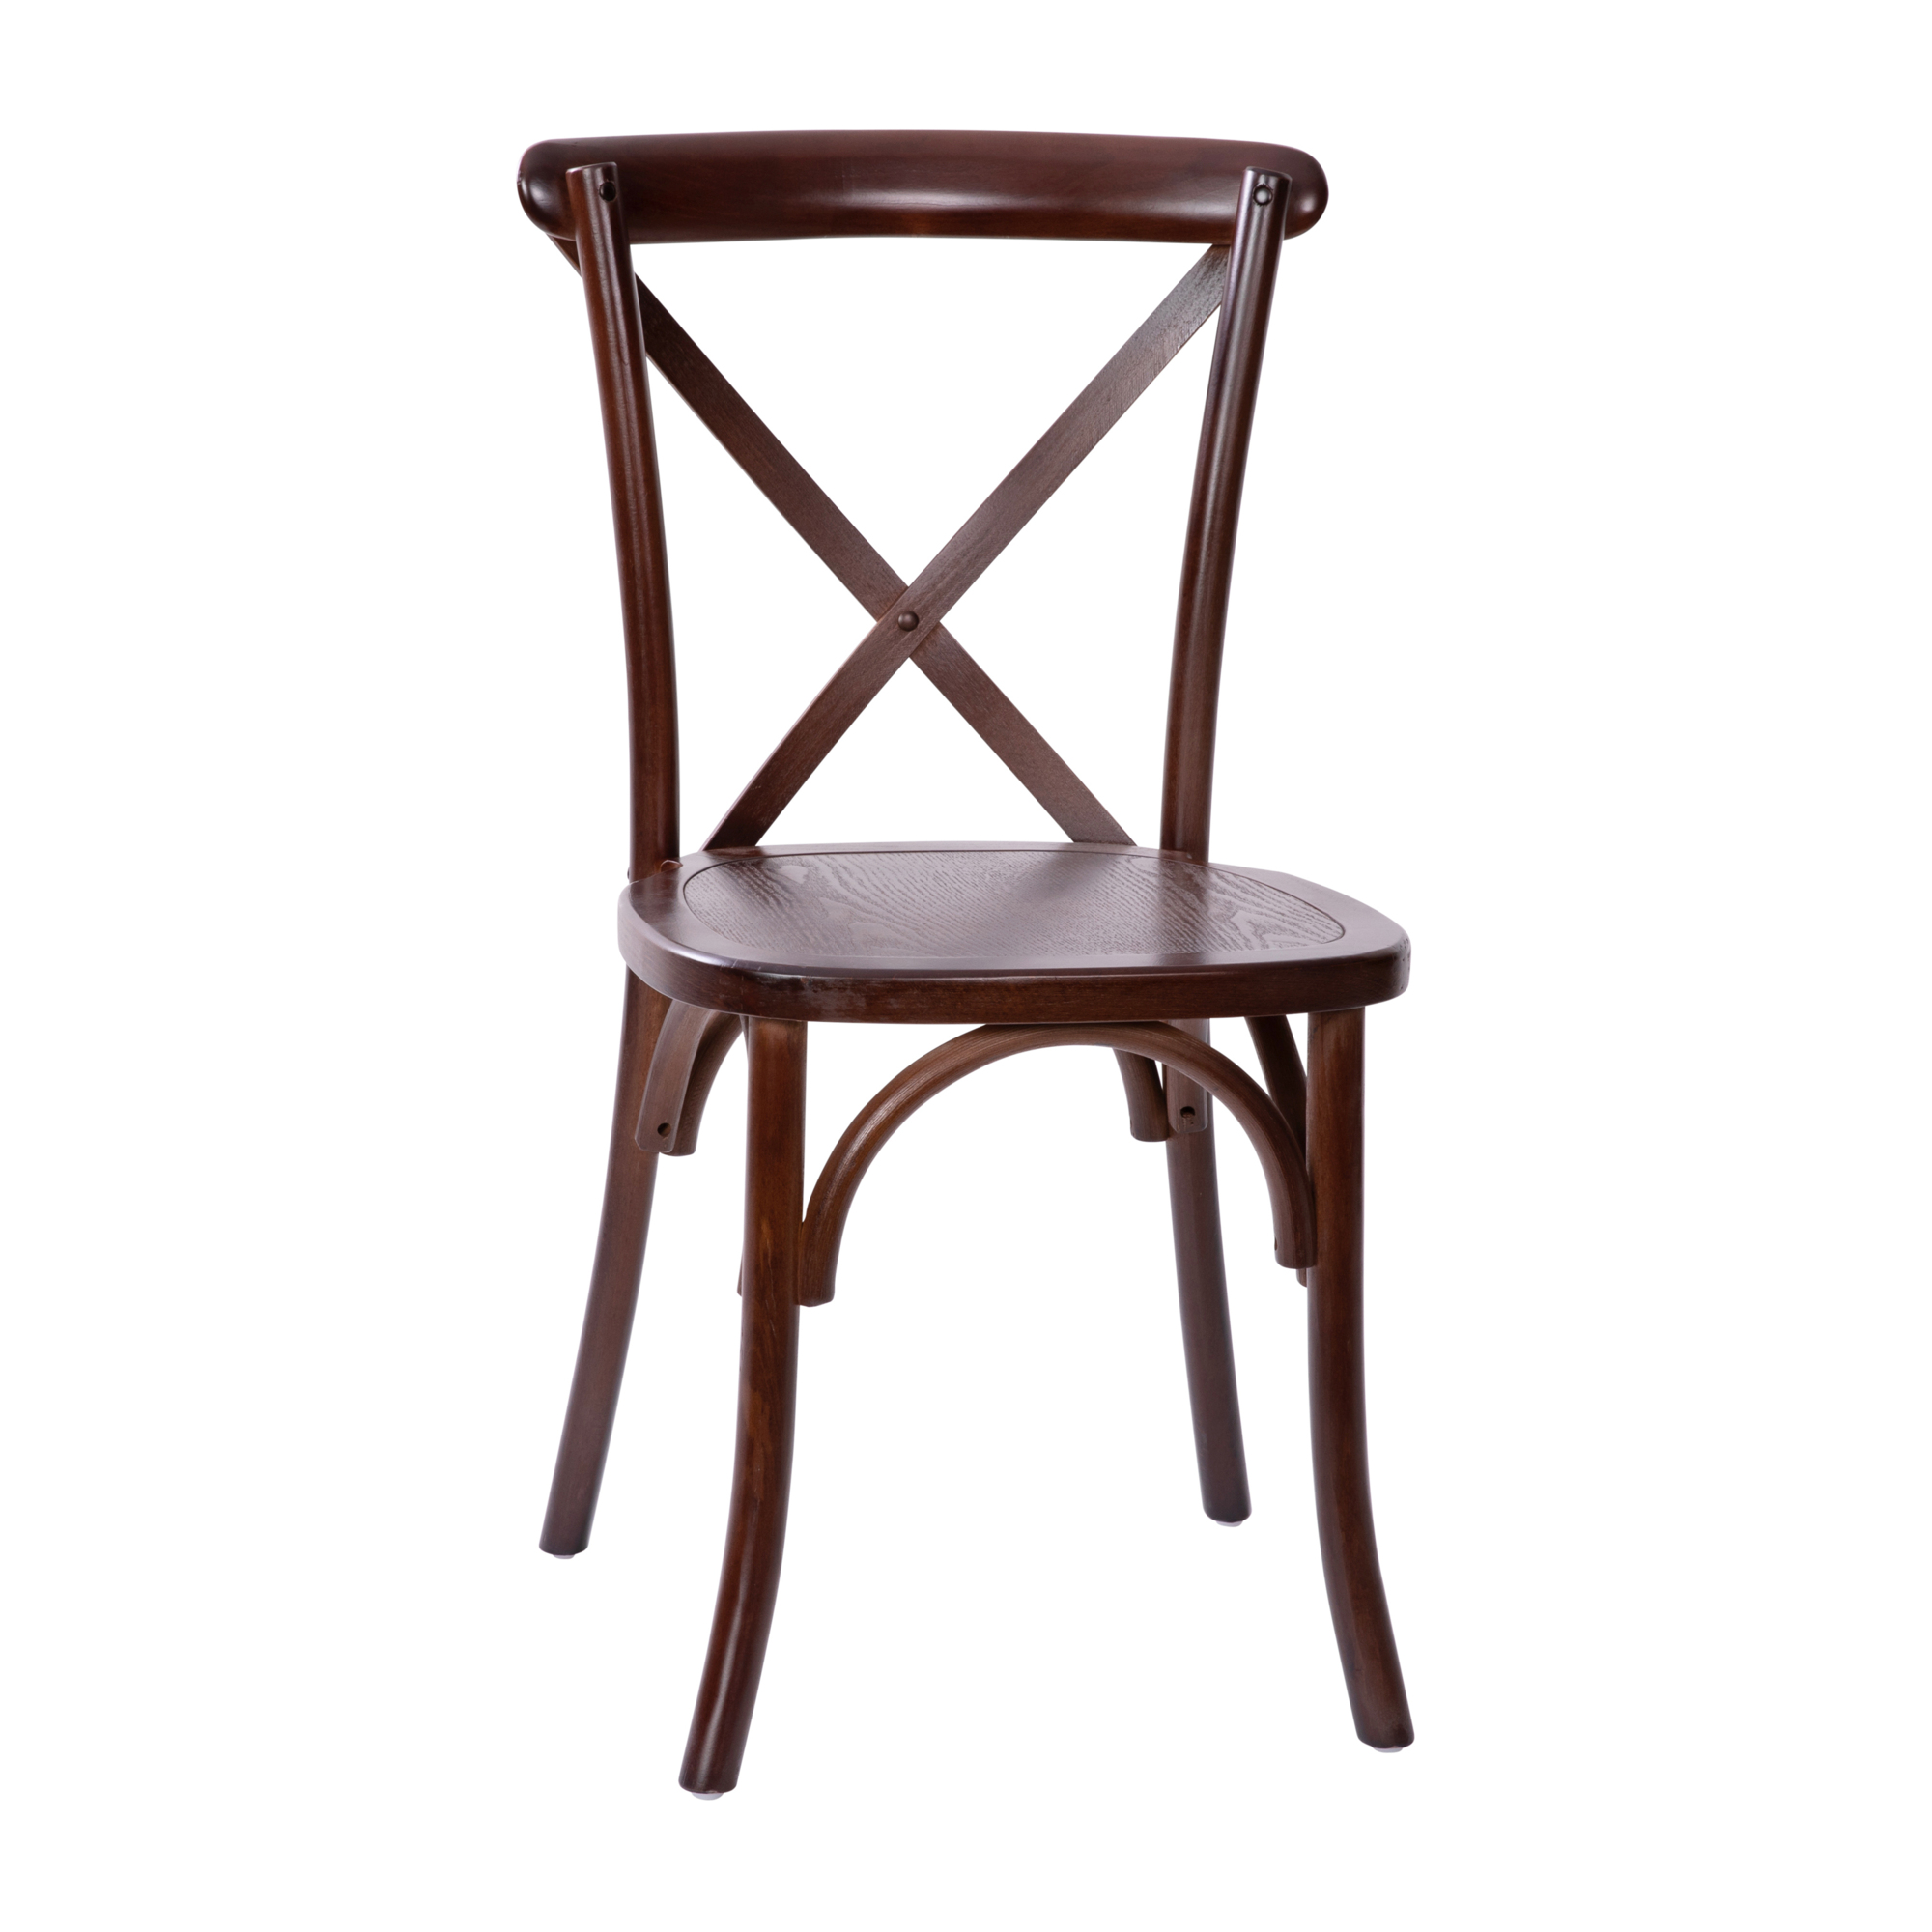 Flash Furniture, Walnut X-Back Chair, Primary Color Brown, Included (qty.) 1, Model XBACKW